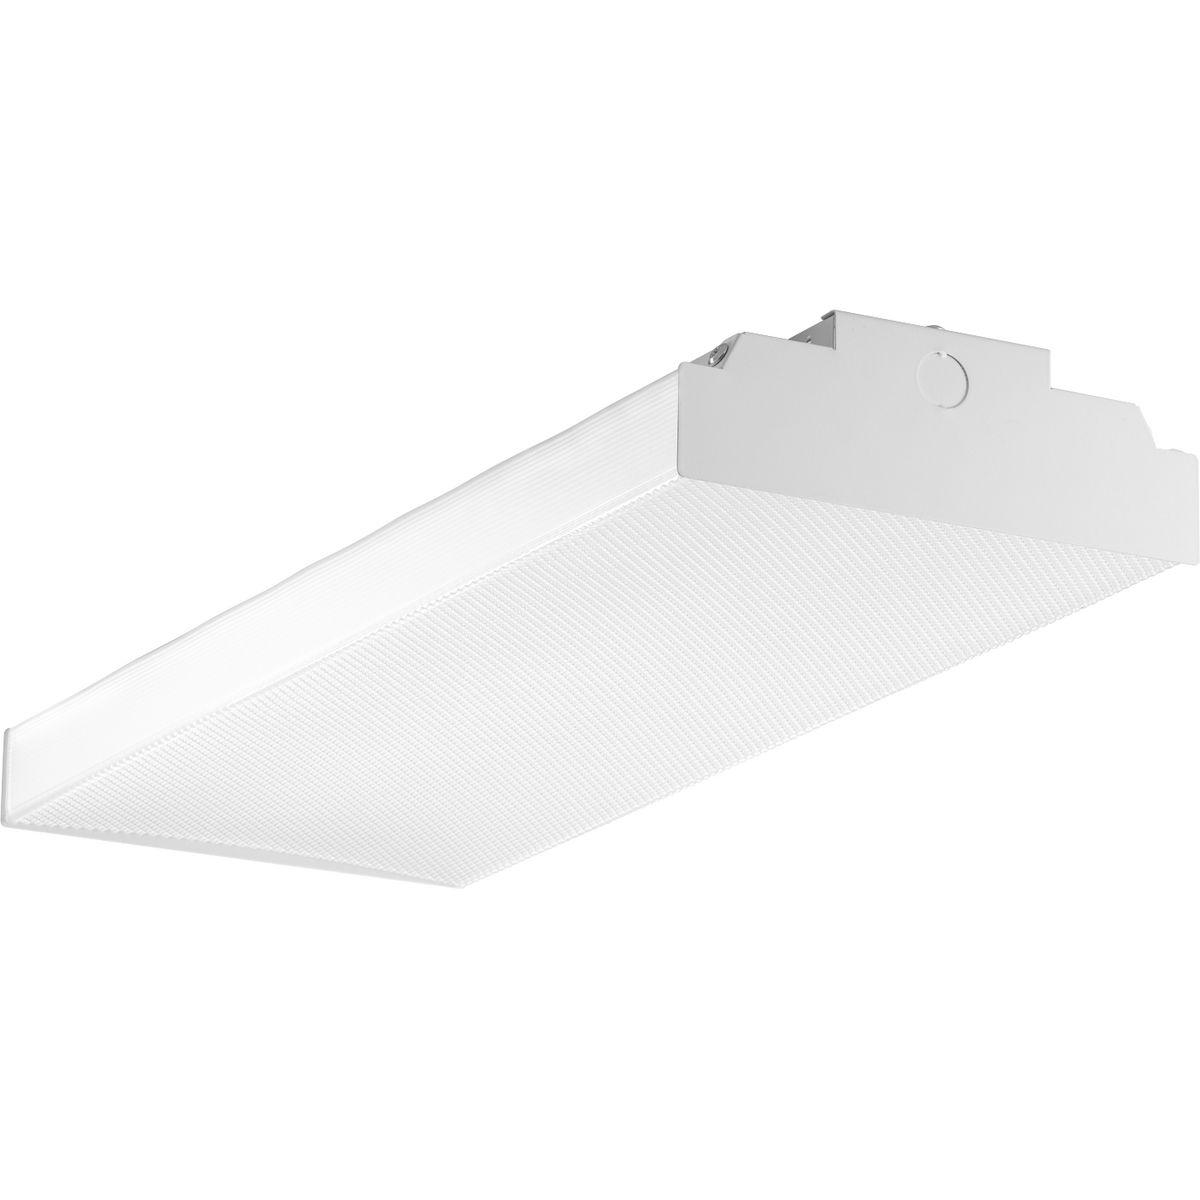 Hubbell PCIAW-LED-2-35K PCIAW is a 2FT LED Wraparound with frosted acrylic lens. This product is surface mounted to the ceiling with fully assembled for quick installation. DesignLights Consortium (DLC) qualified.  ; Long Life 50,000 hour LEDs for reduced maintenance ; Heavy gau